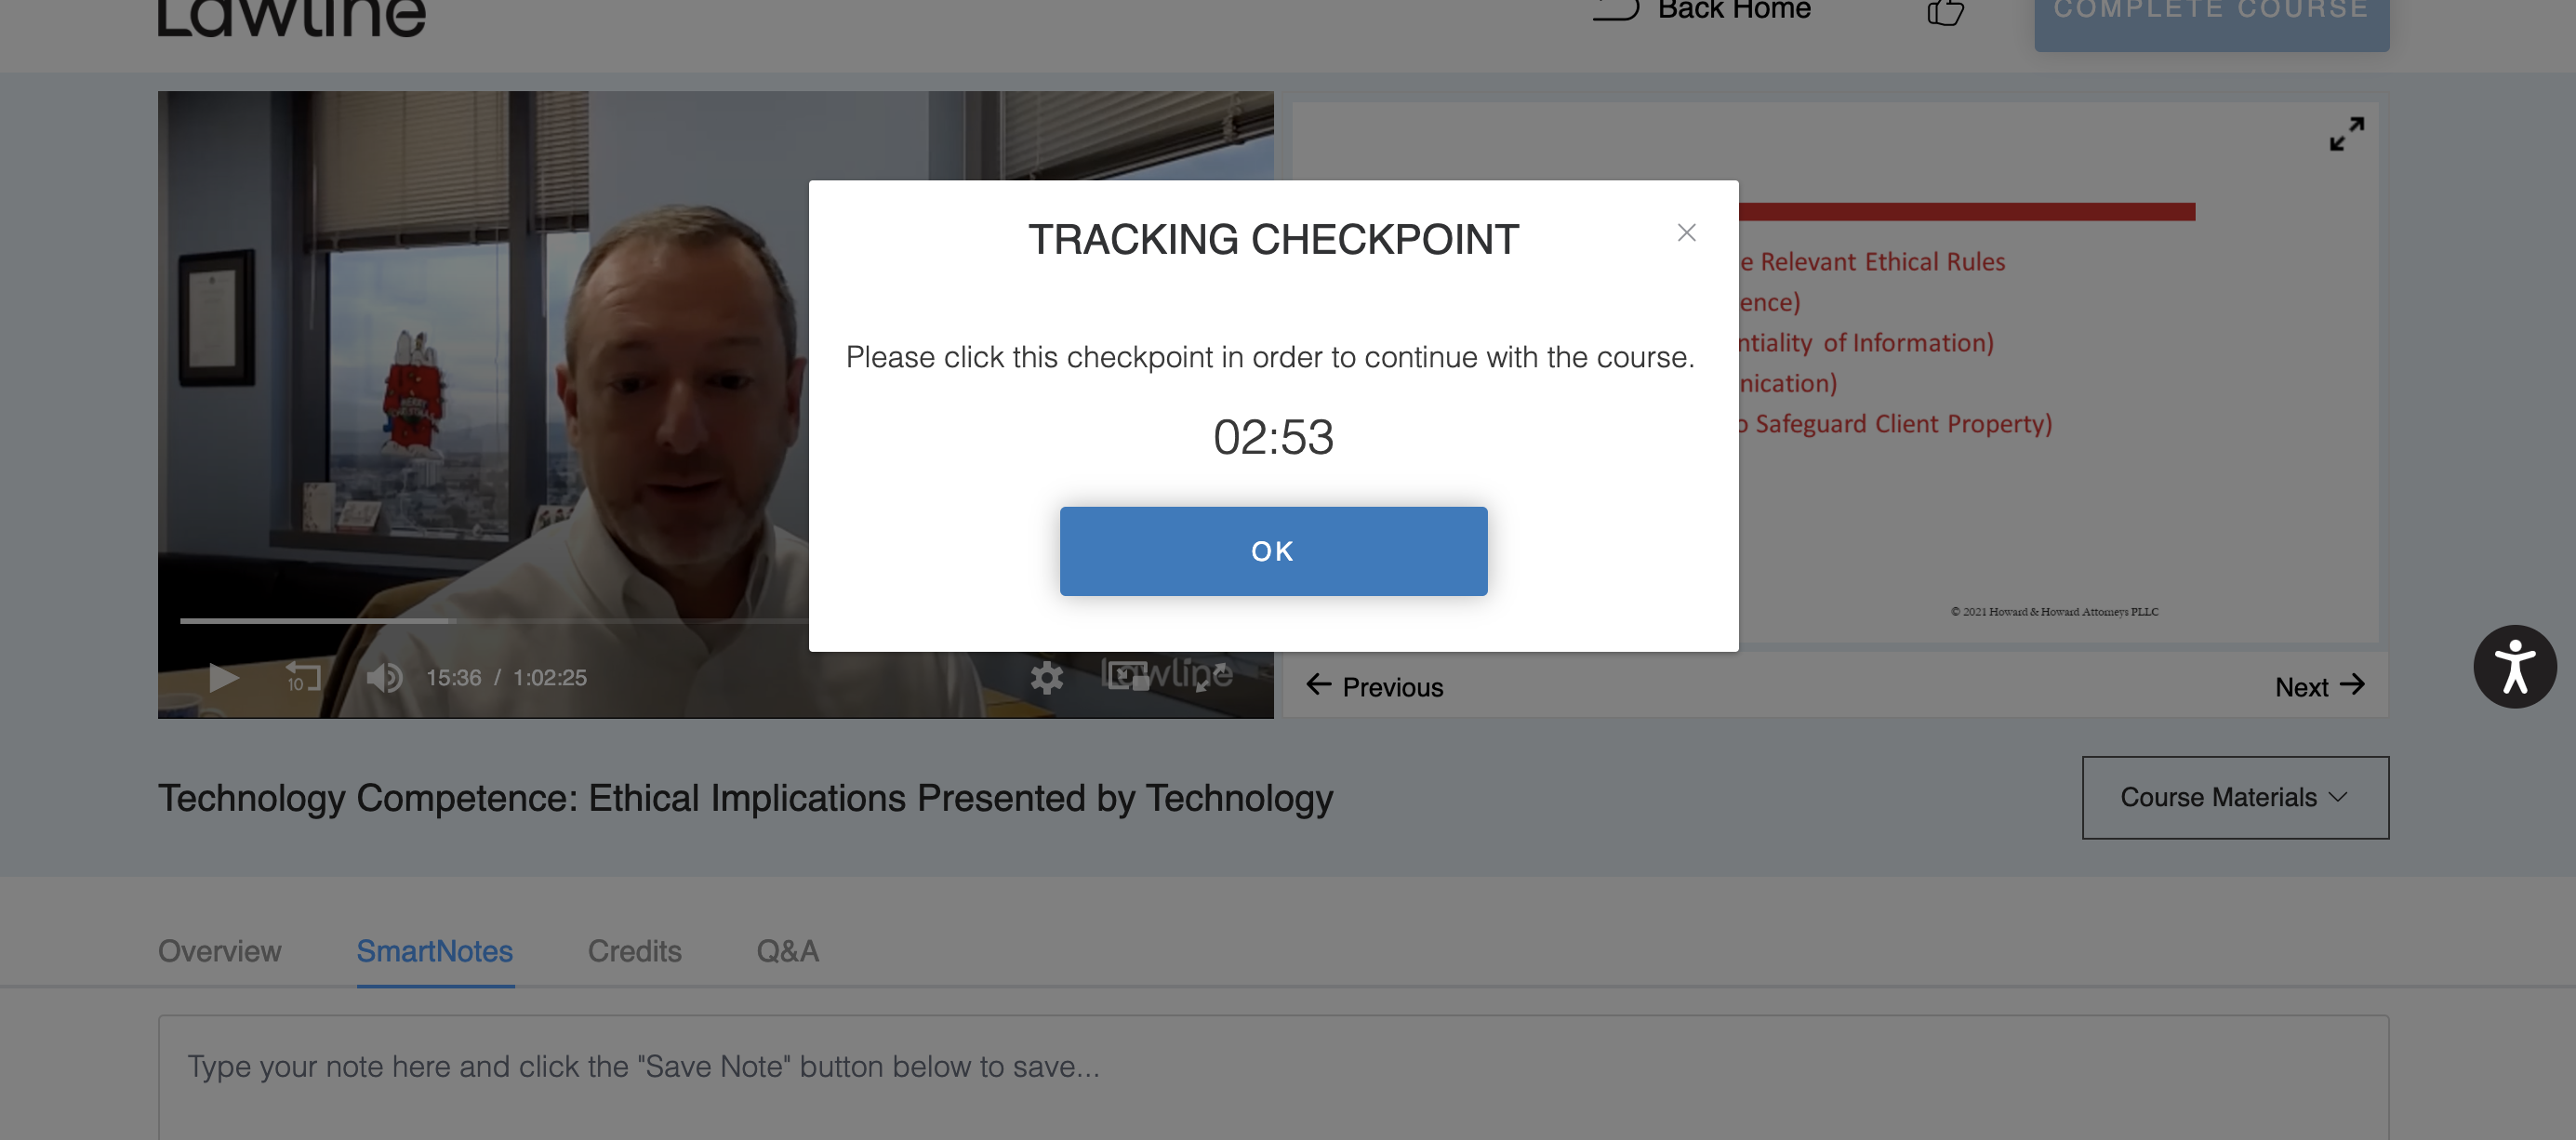 verification checkpoint pop up in center of screen with blue OK button